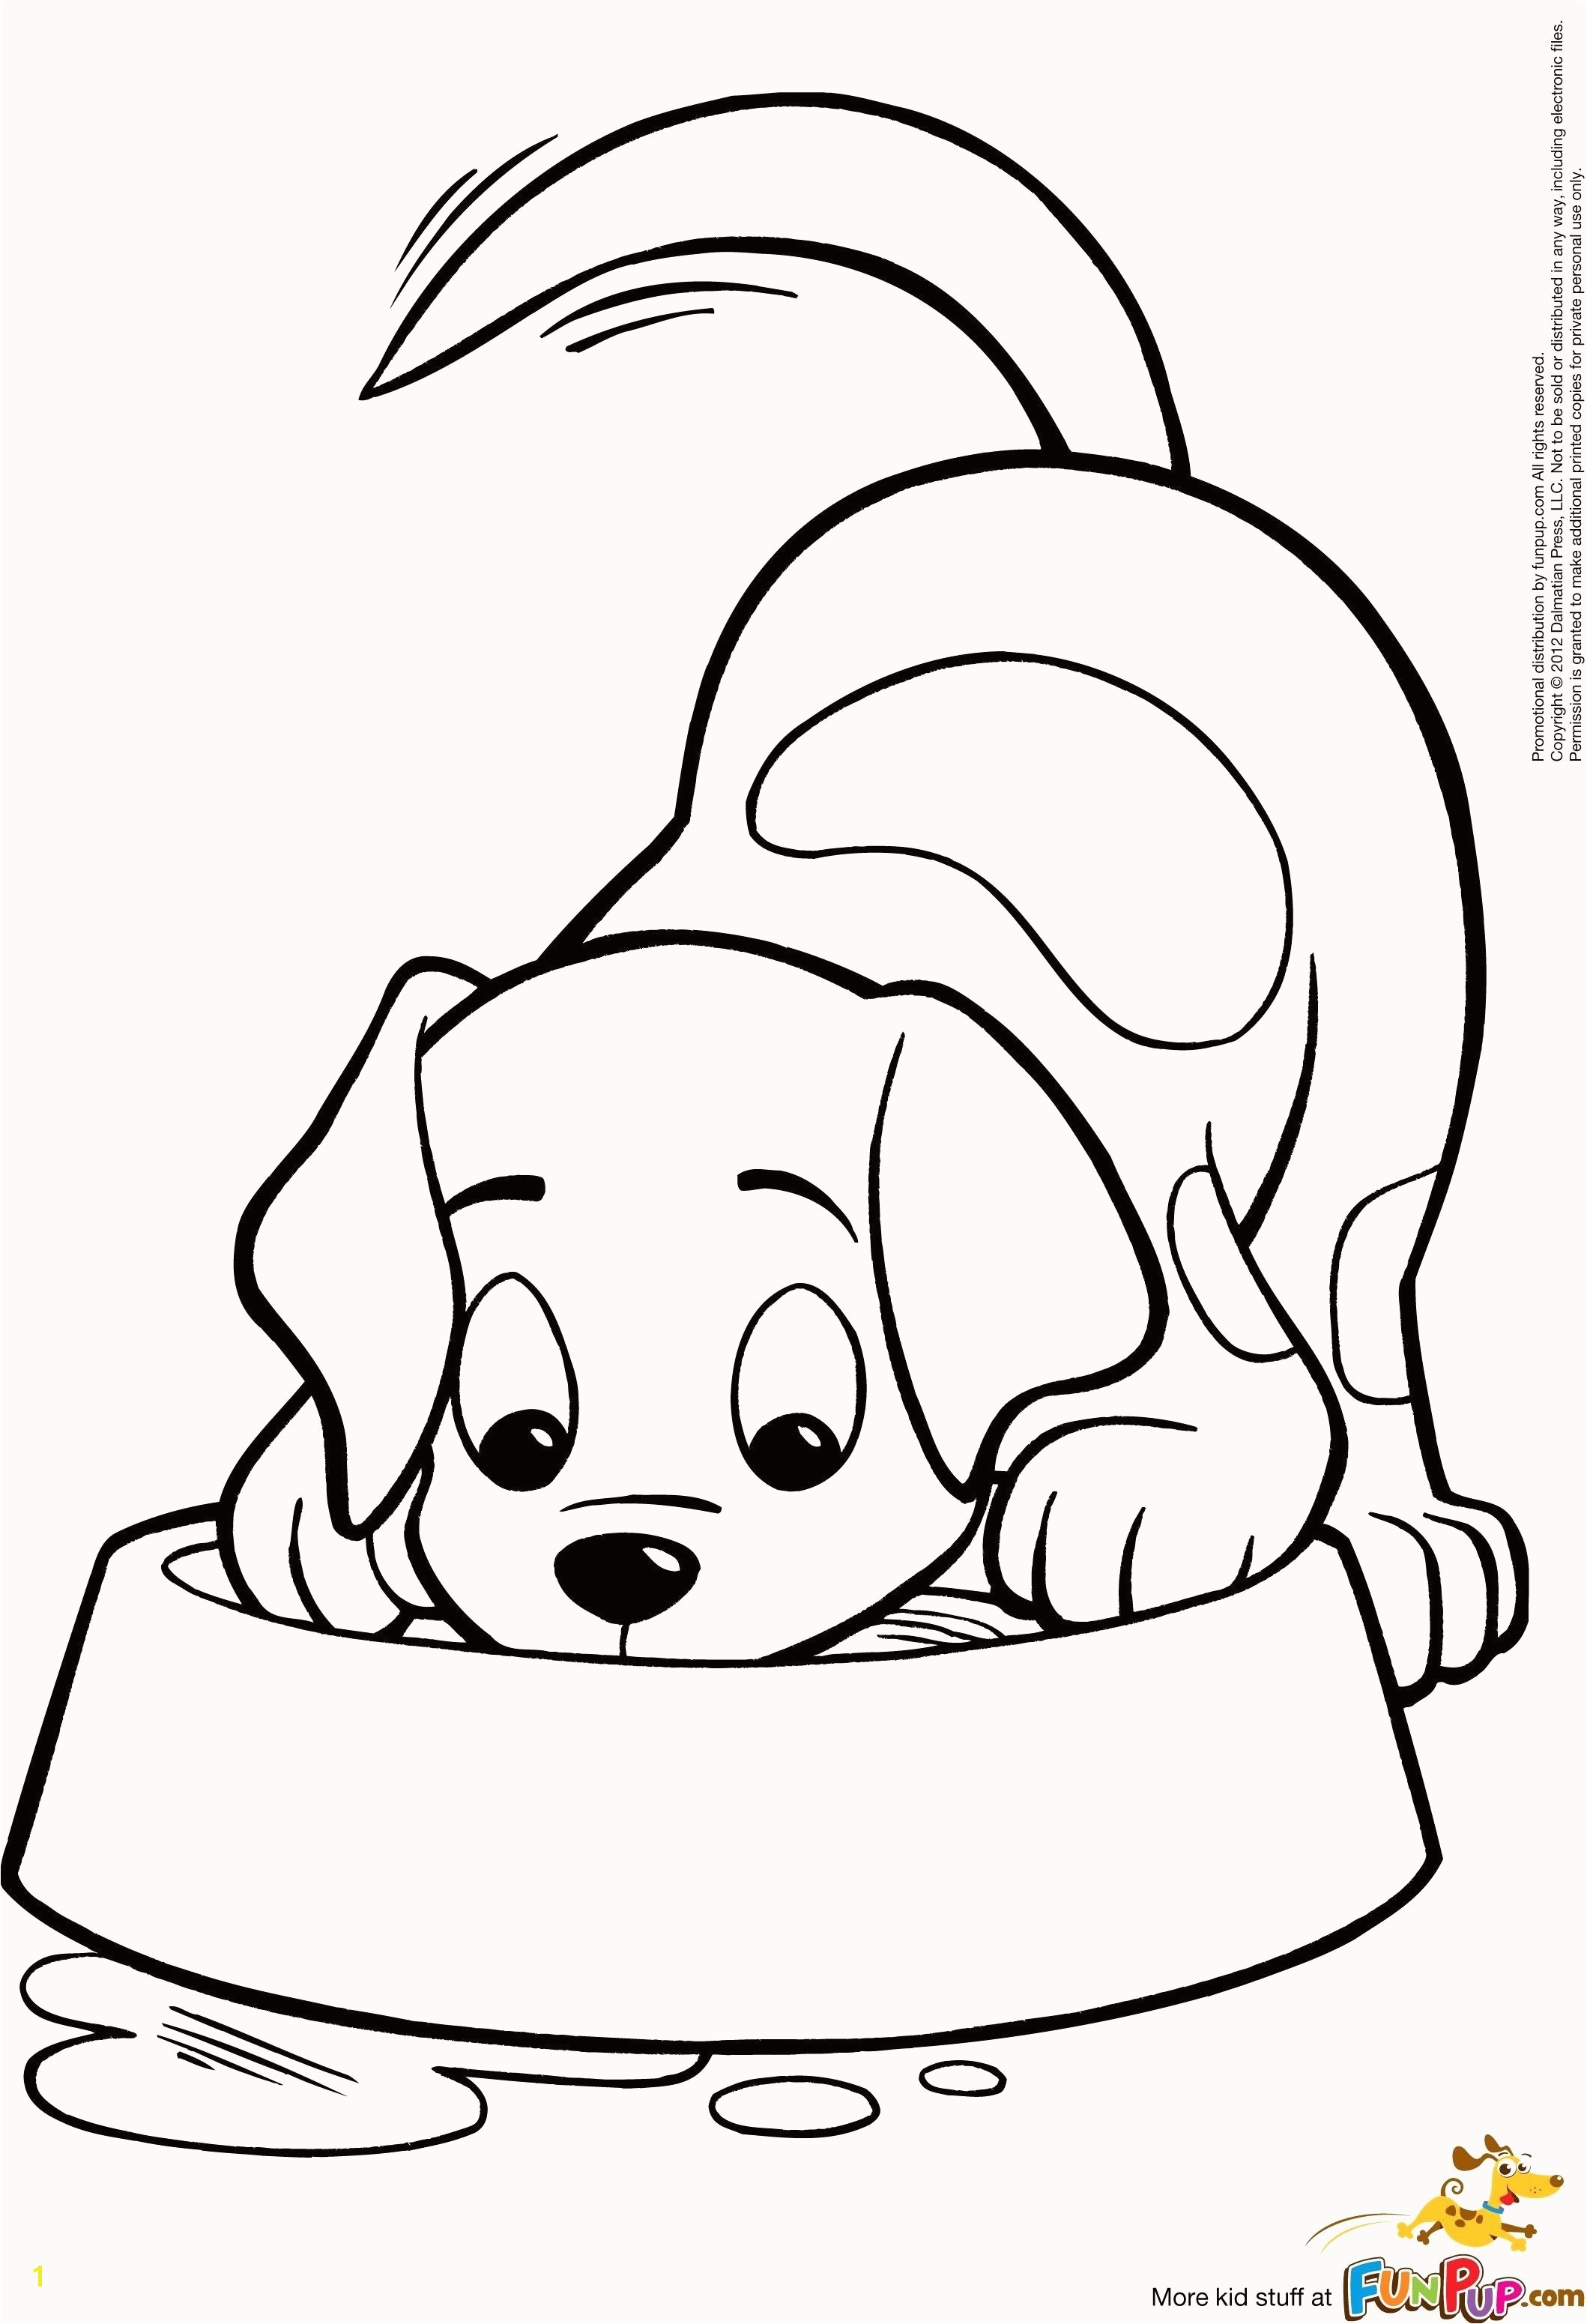 Pet Coloring Pages for Kids Luxury Panda Coloring Pages Awesome Printable Od Dog Coloring Pages Free